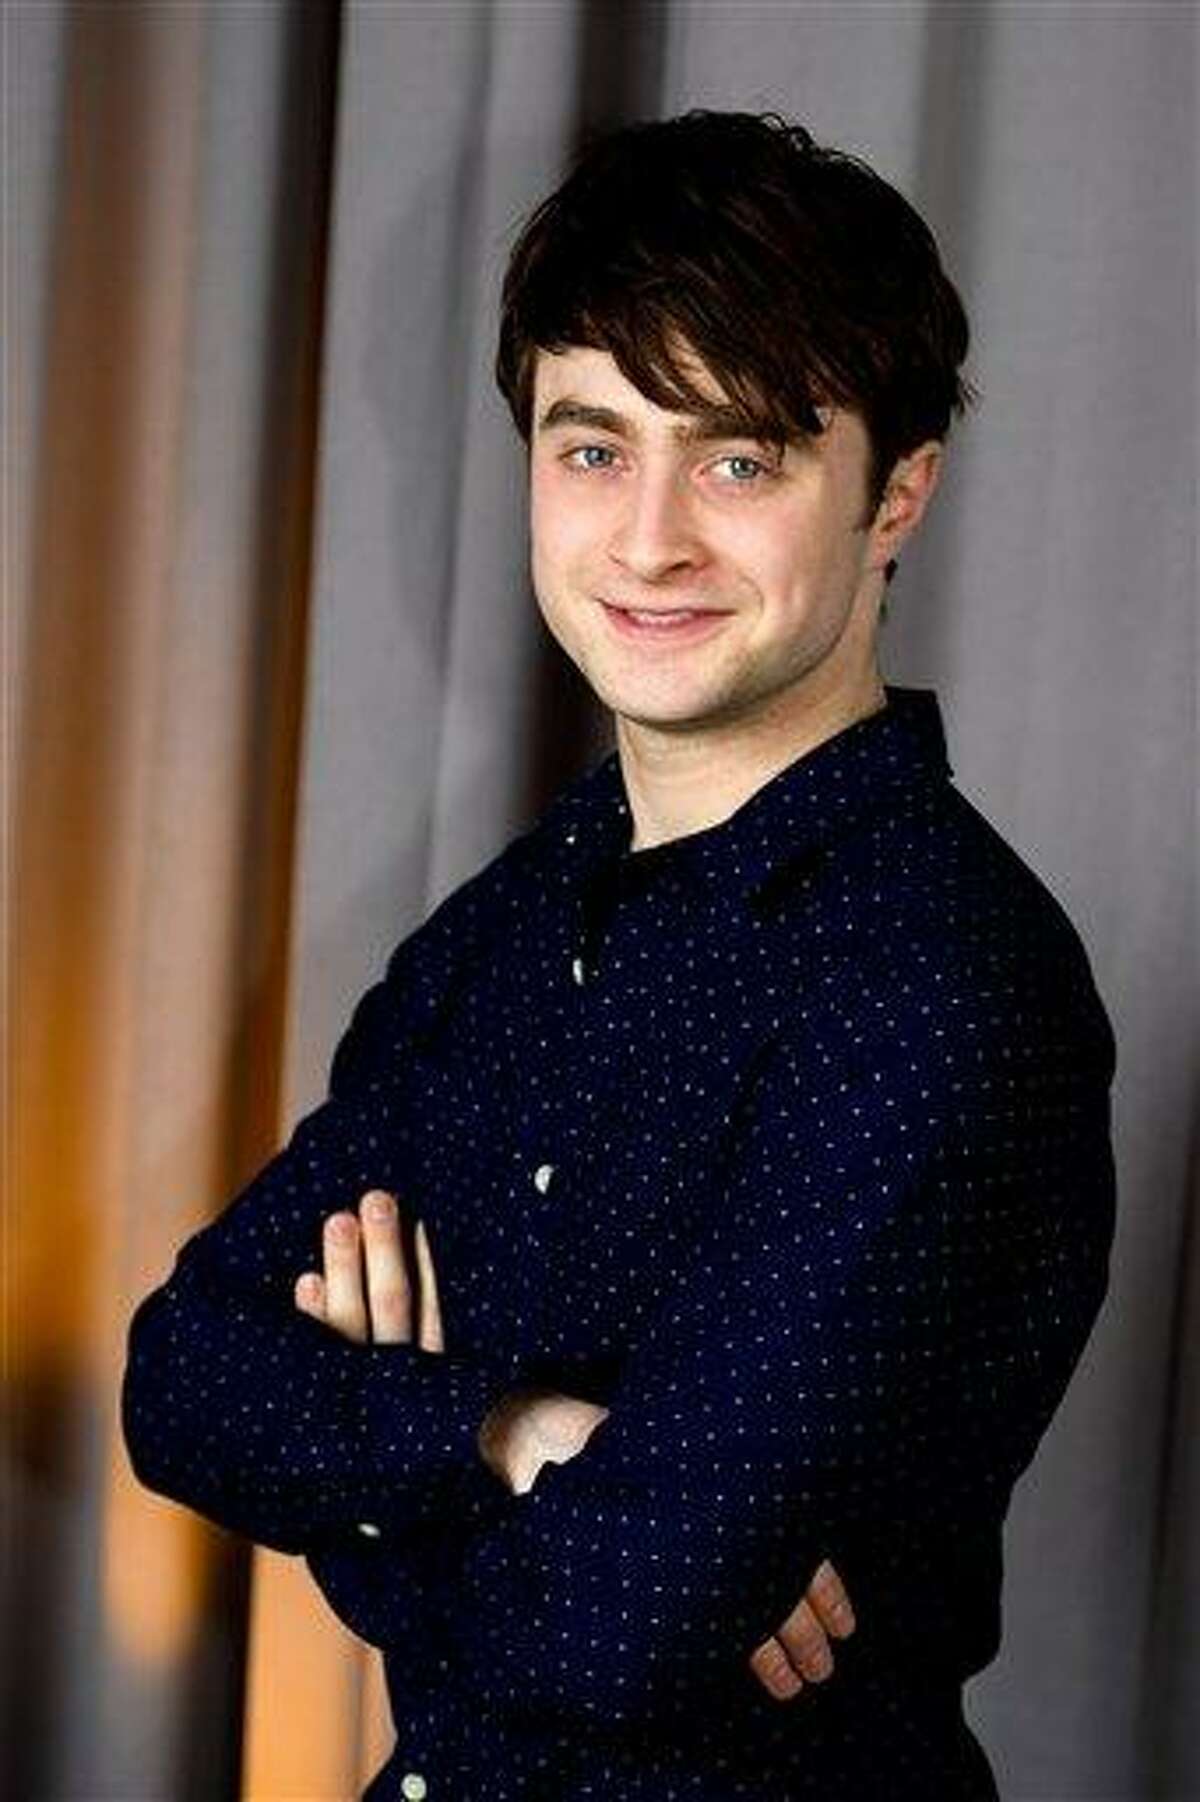 In this March 17, 2011 photo, actor Daniel Radcliffe poses for a portrait in New York. Radcliffe will be honored with the Trevor Project's Hero Award at a ceremony in New York in June, 2011. (AP Photo/Charles Sykes)